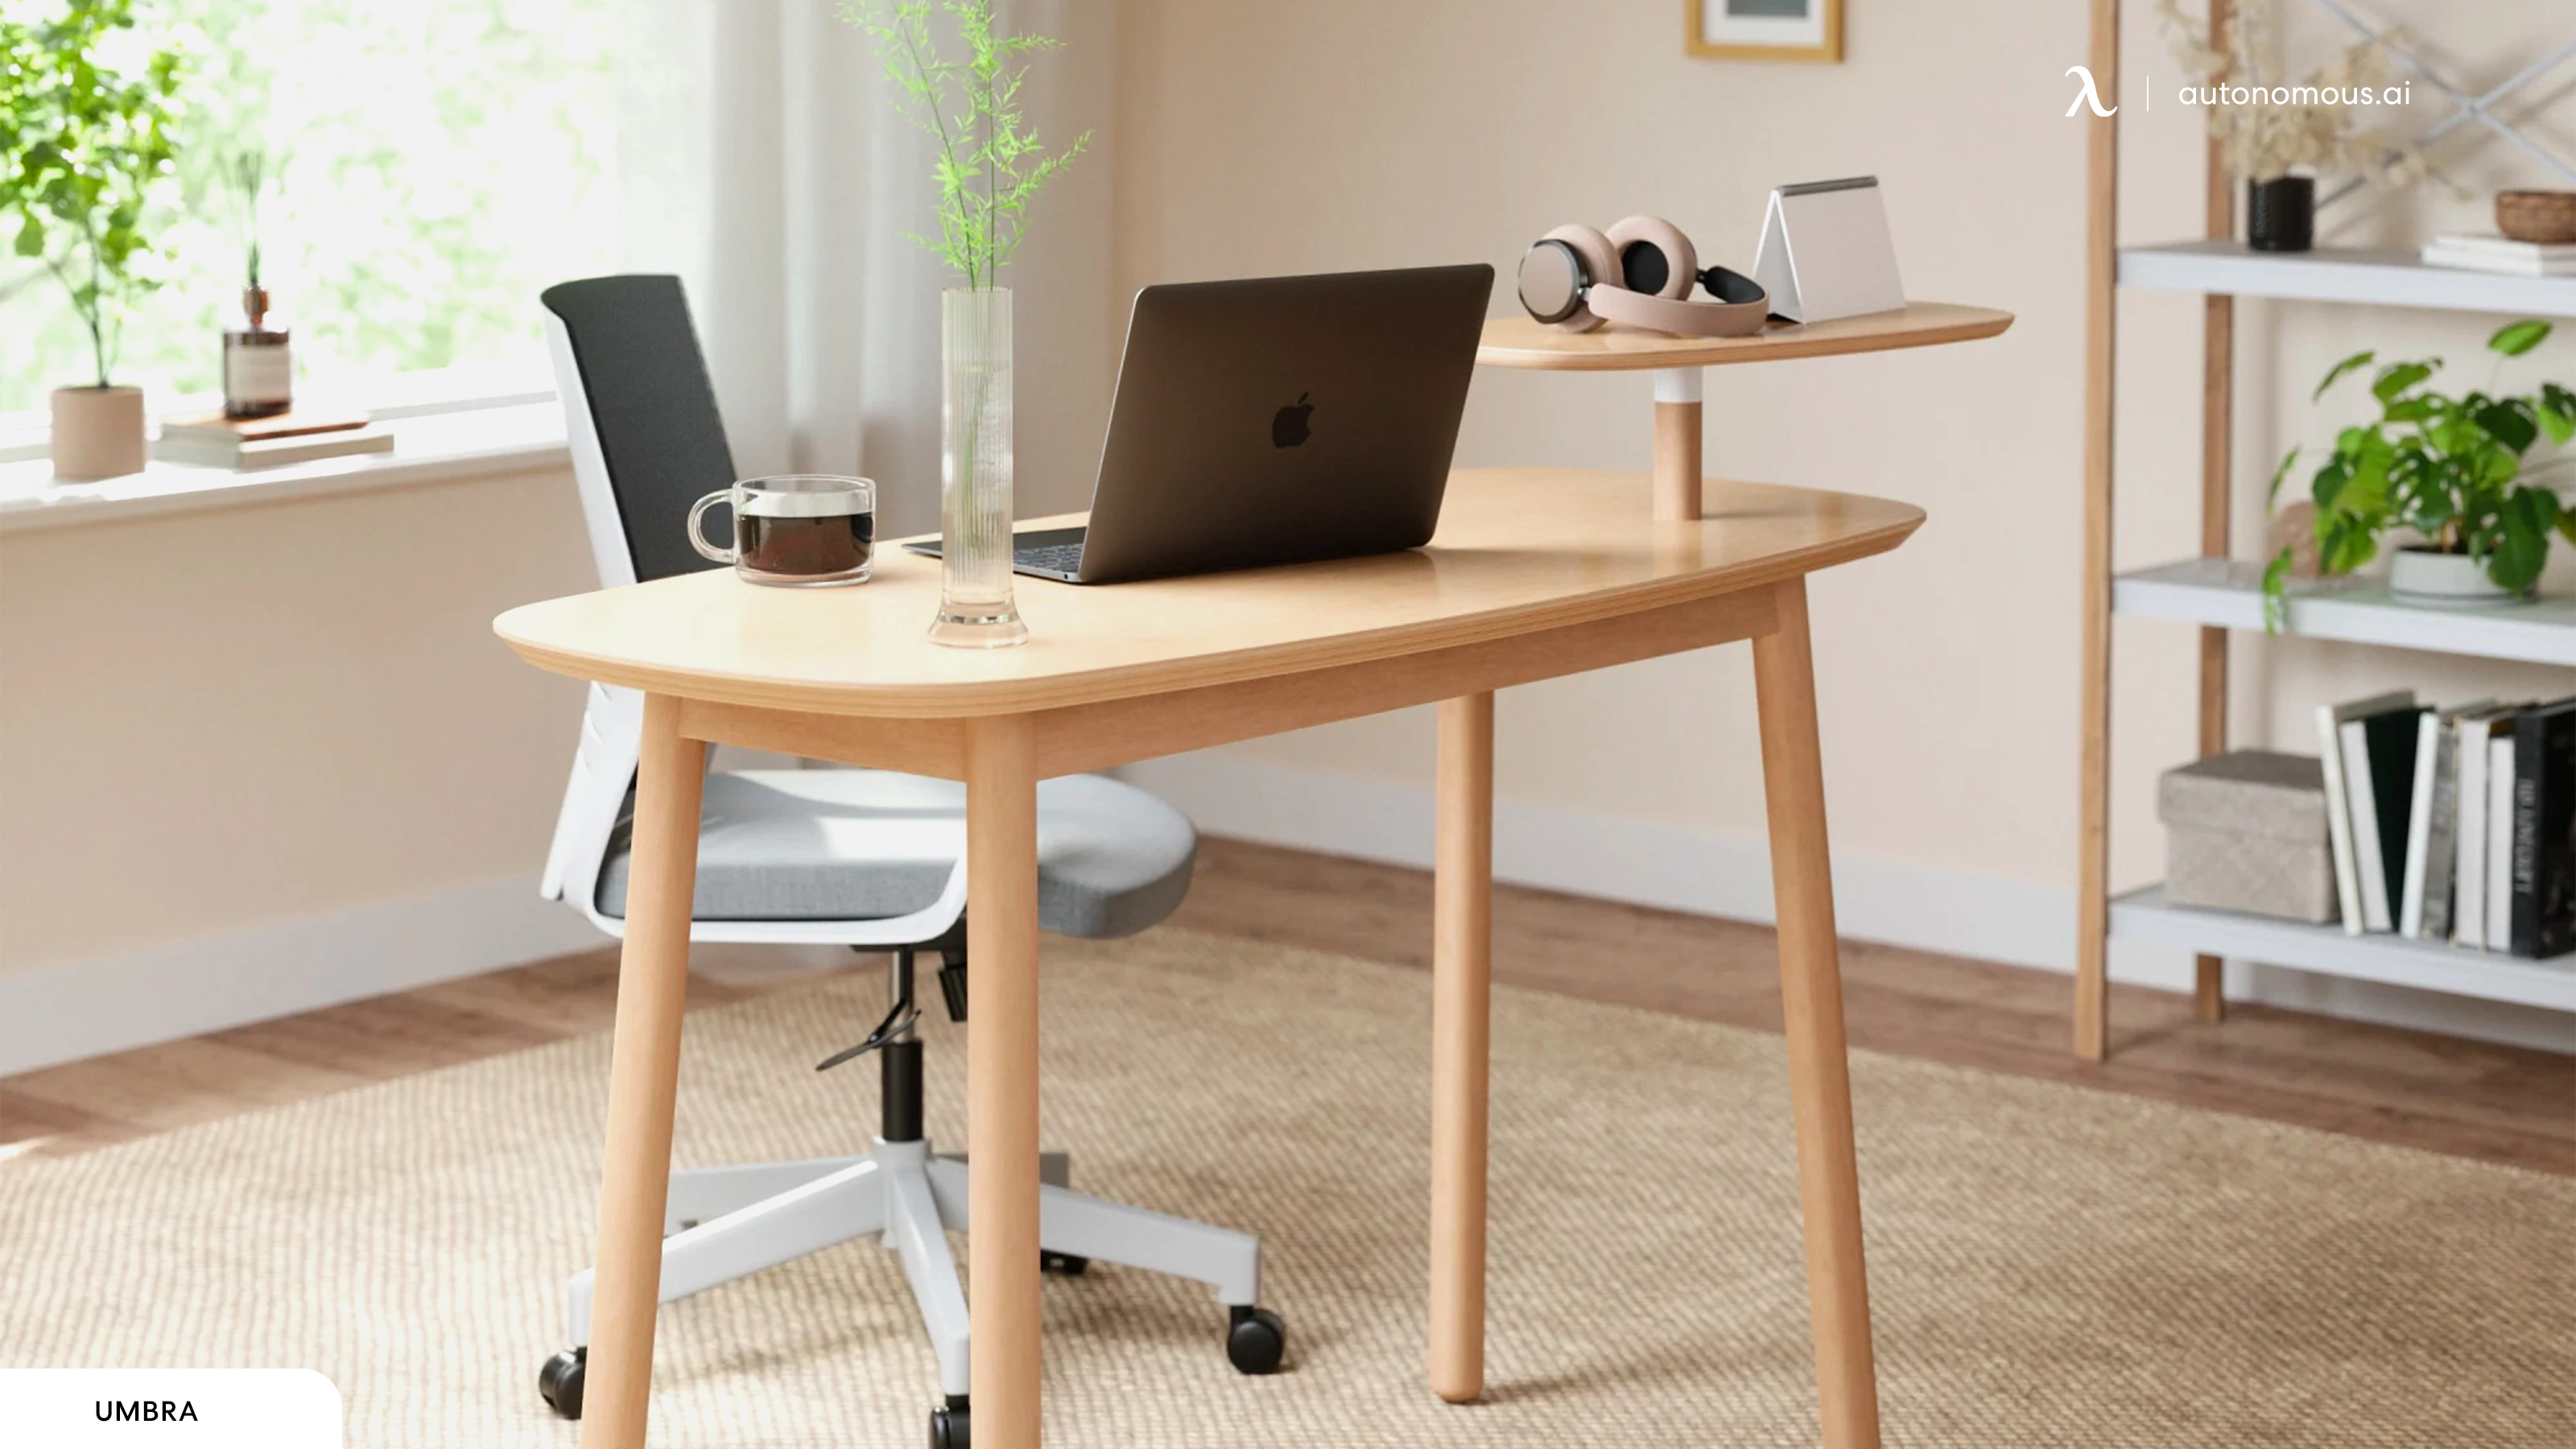 Improve Your Office Aesthetics with a Light Wood Desk